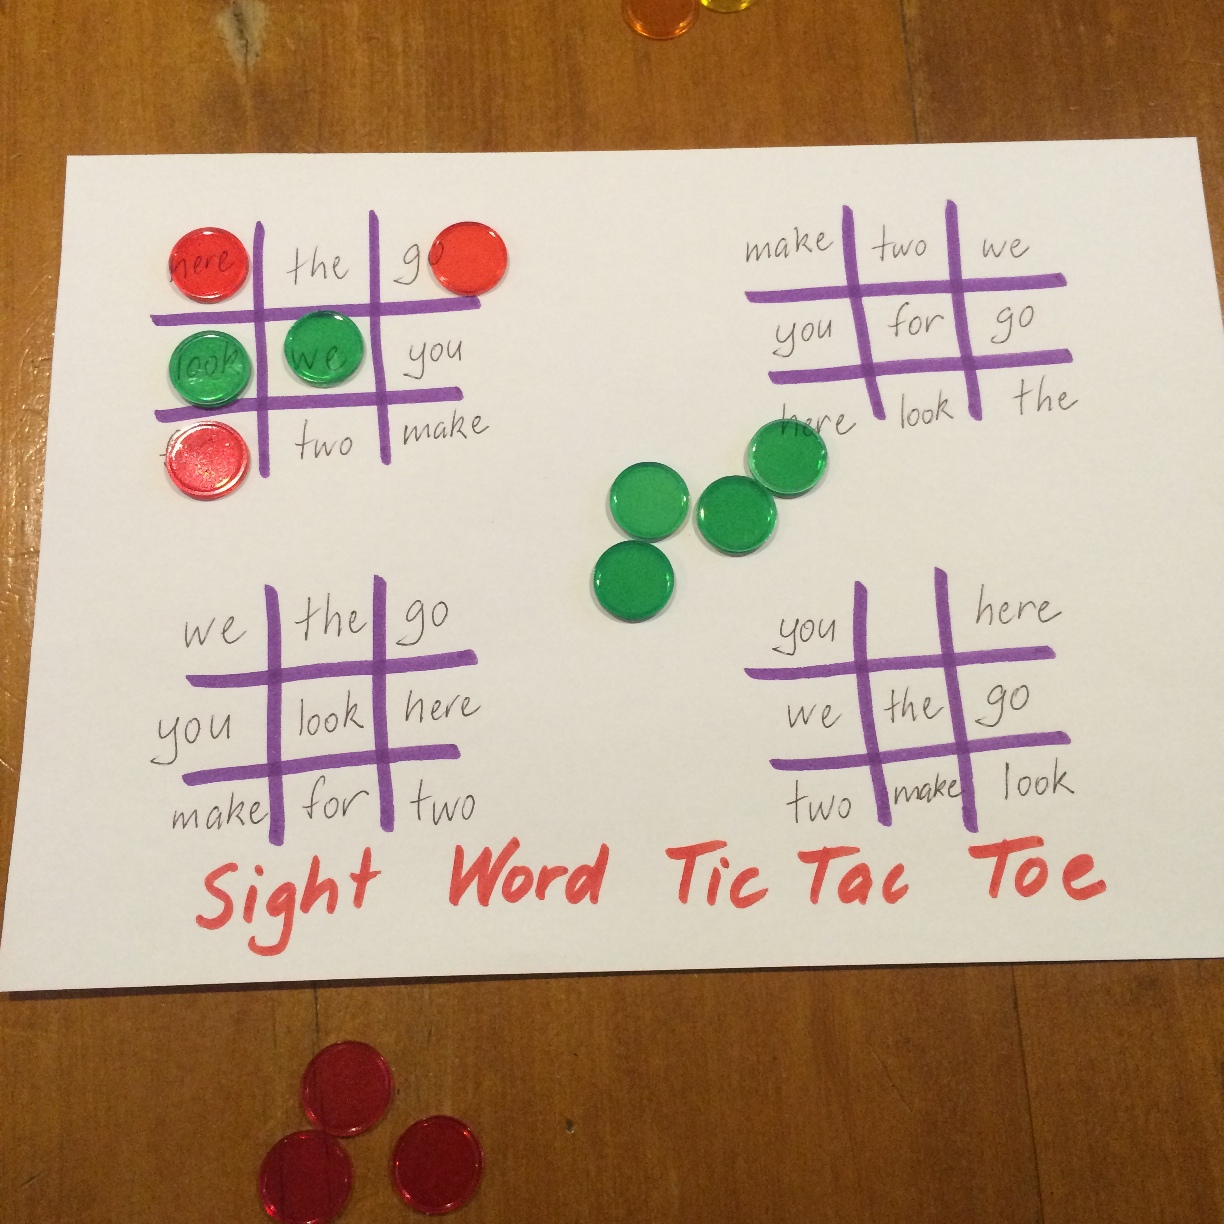 Fun Games 4 Learning: Sight Word Games